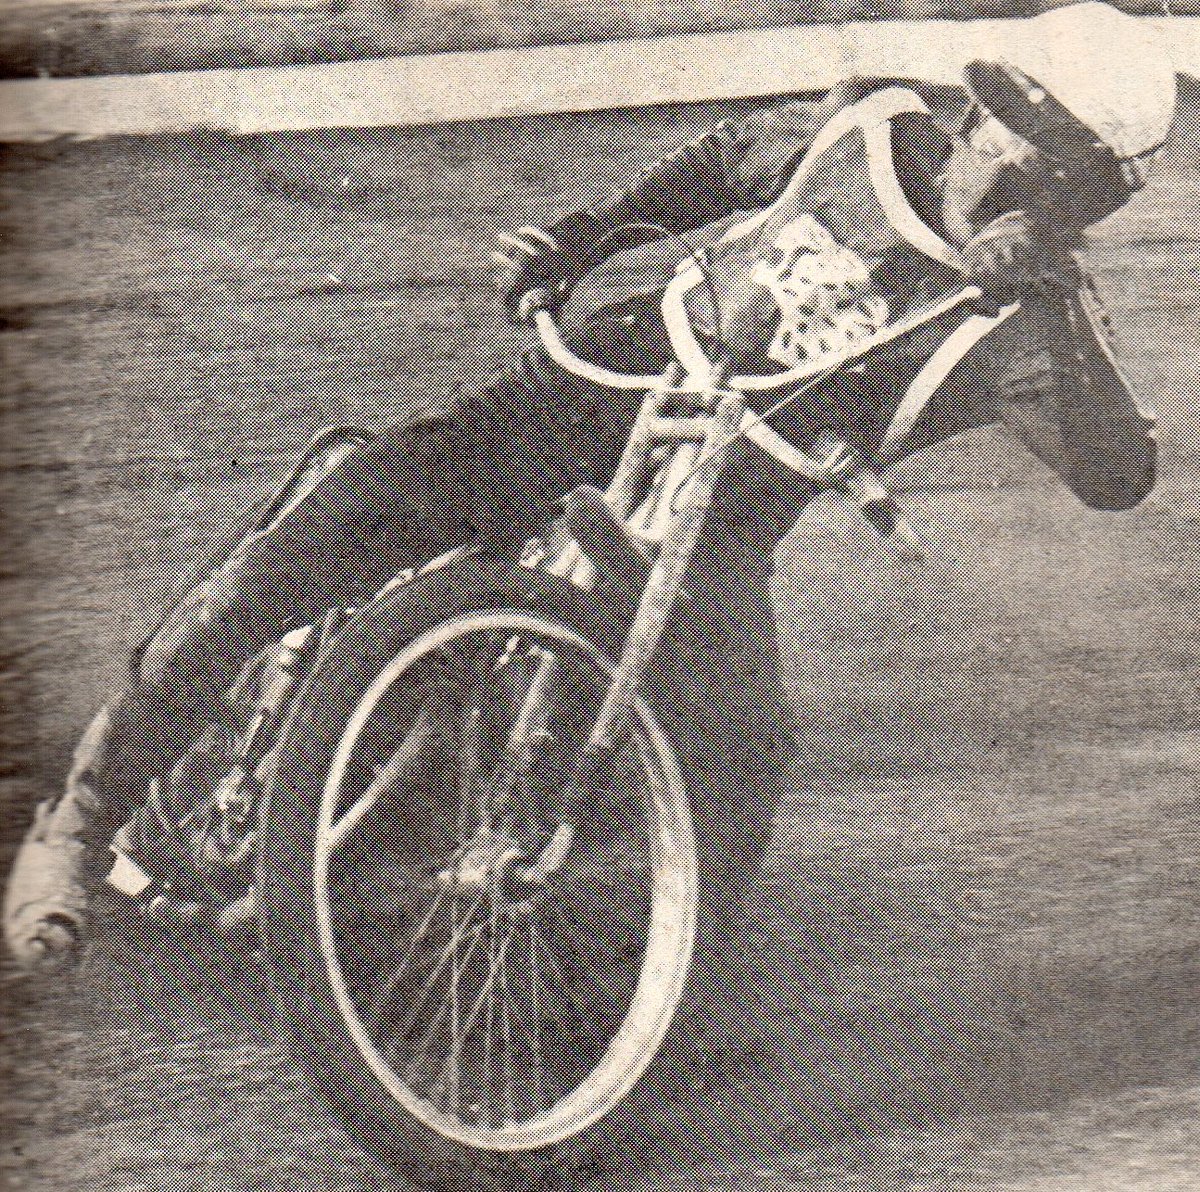 OTD in 1977 Hasse Holmqvist won the 2nd Swedish Qualifying Round of the World Championship @ Motala. Hasse scored 14 points, joining him on the podium were Rikard Hellsen with 13 & Christer Sjosten 12. Also qualifying for the next stage were Bengt Jansson & Borje Klingberg.